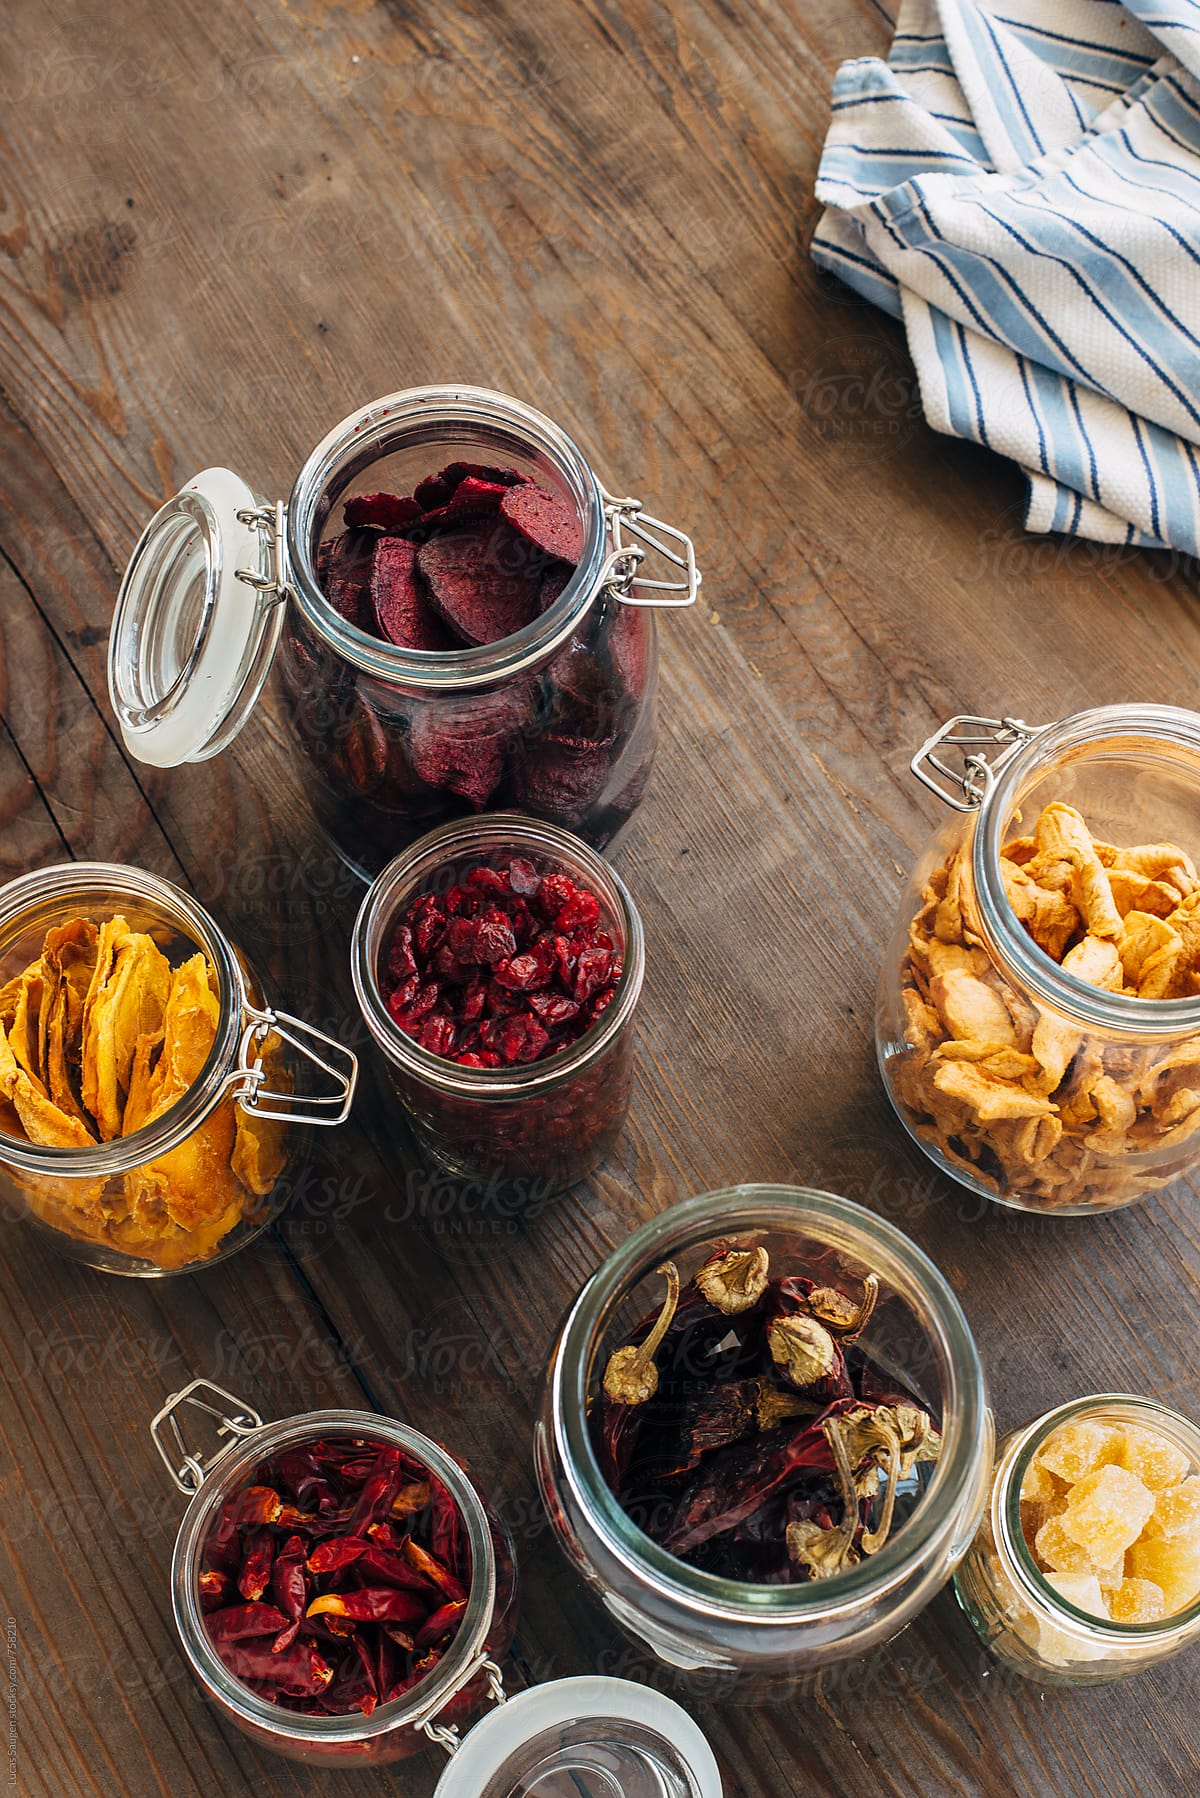 Overhead shot of open glass jars of dehydrated fruits and peppers.